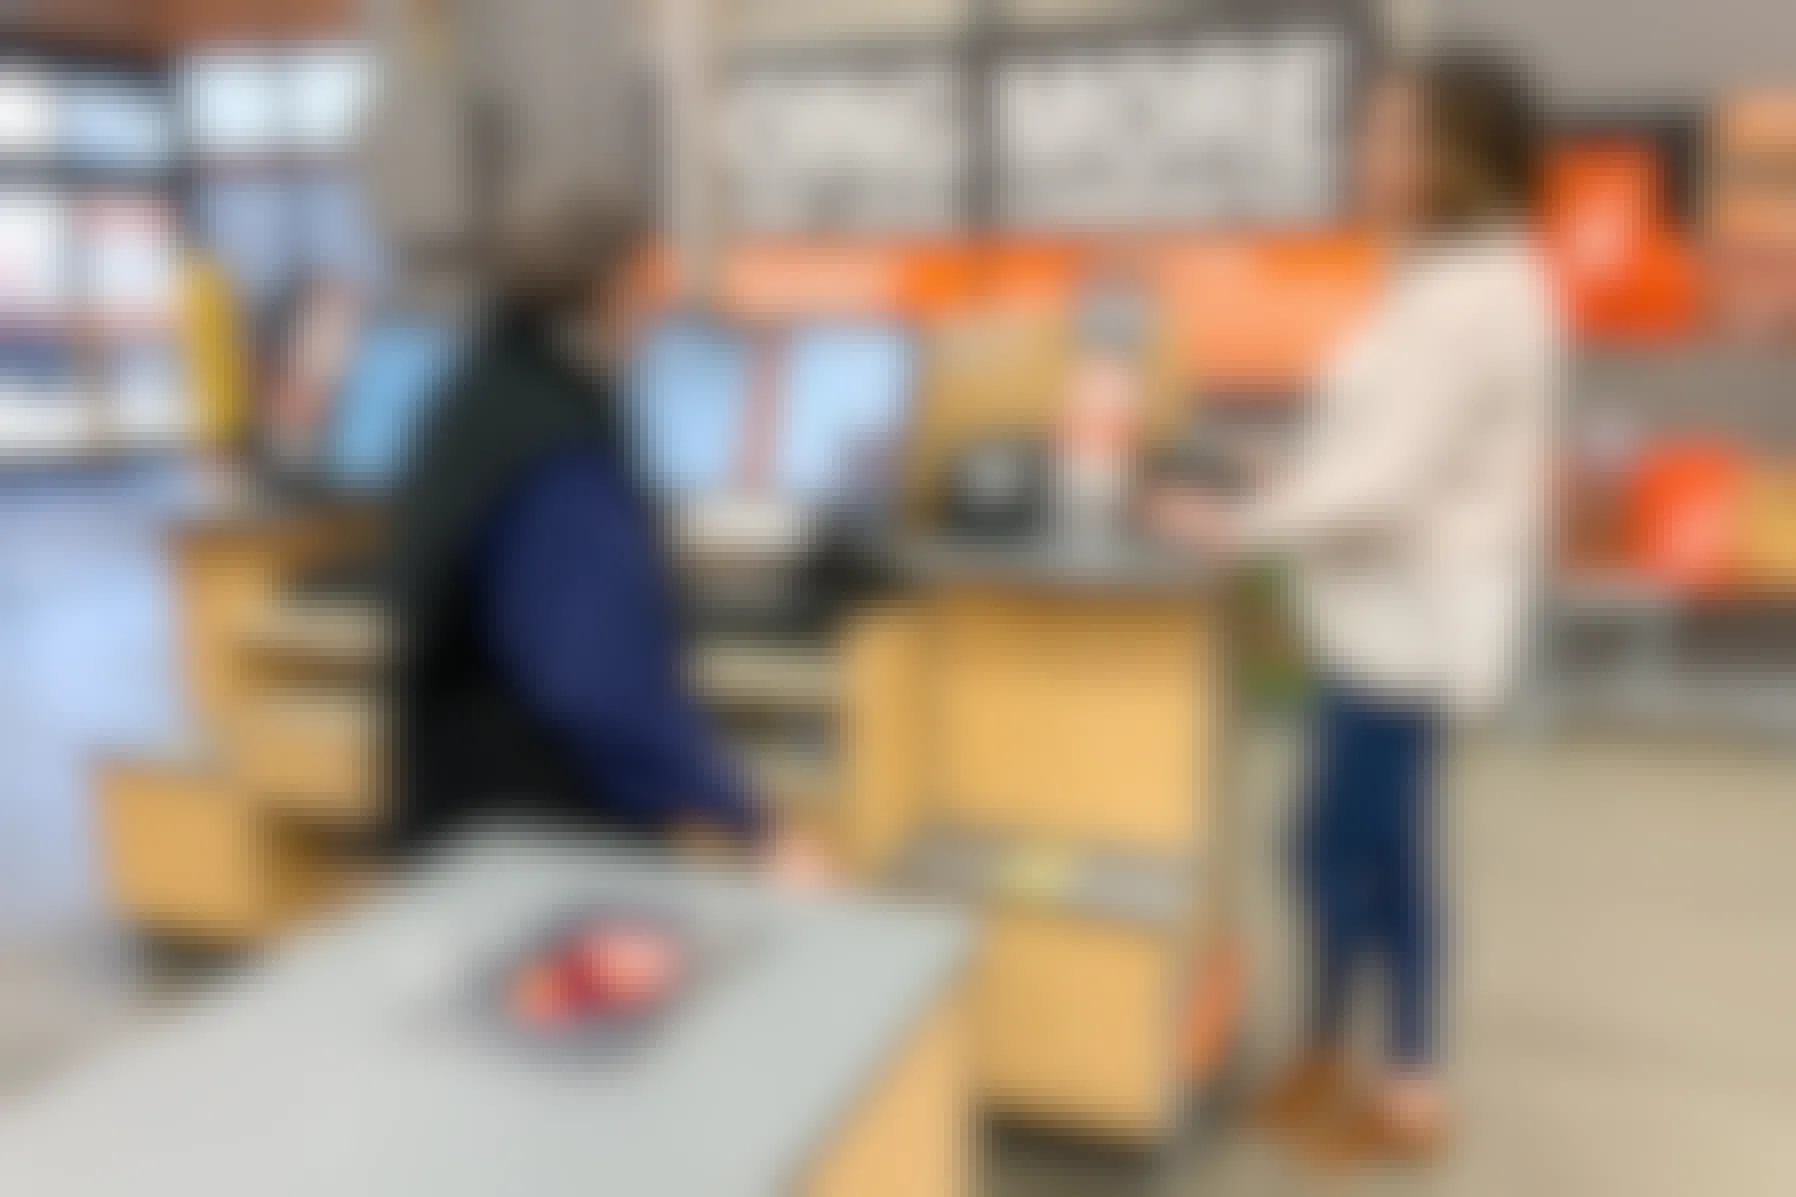 A woman and employee at the checkout register at the Home Depot.